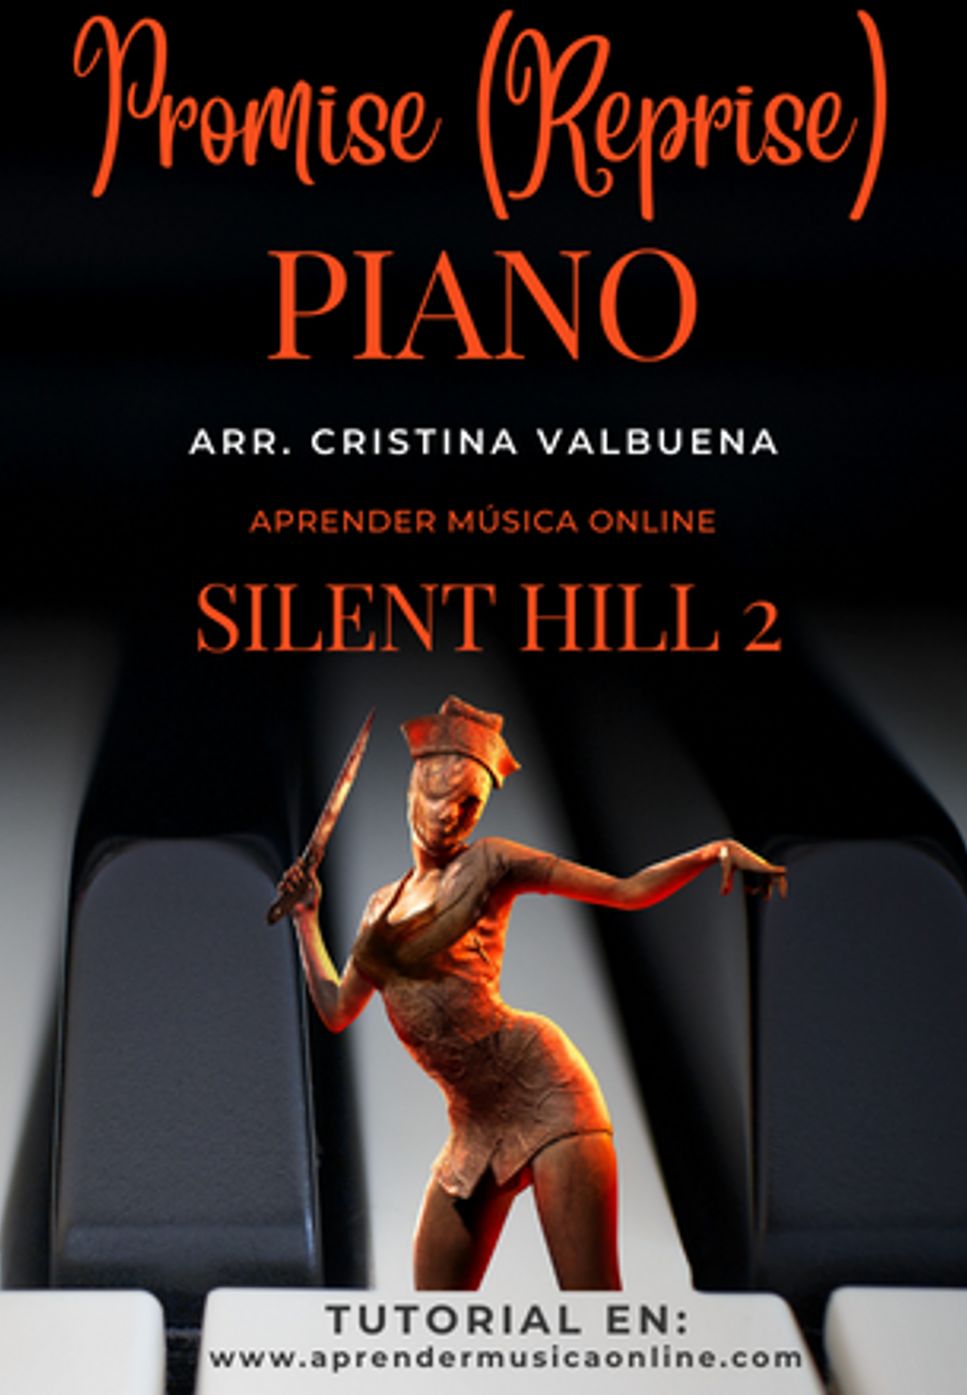 Silent Hill 2 - Promise (Reprise) by Cristina Valbuena